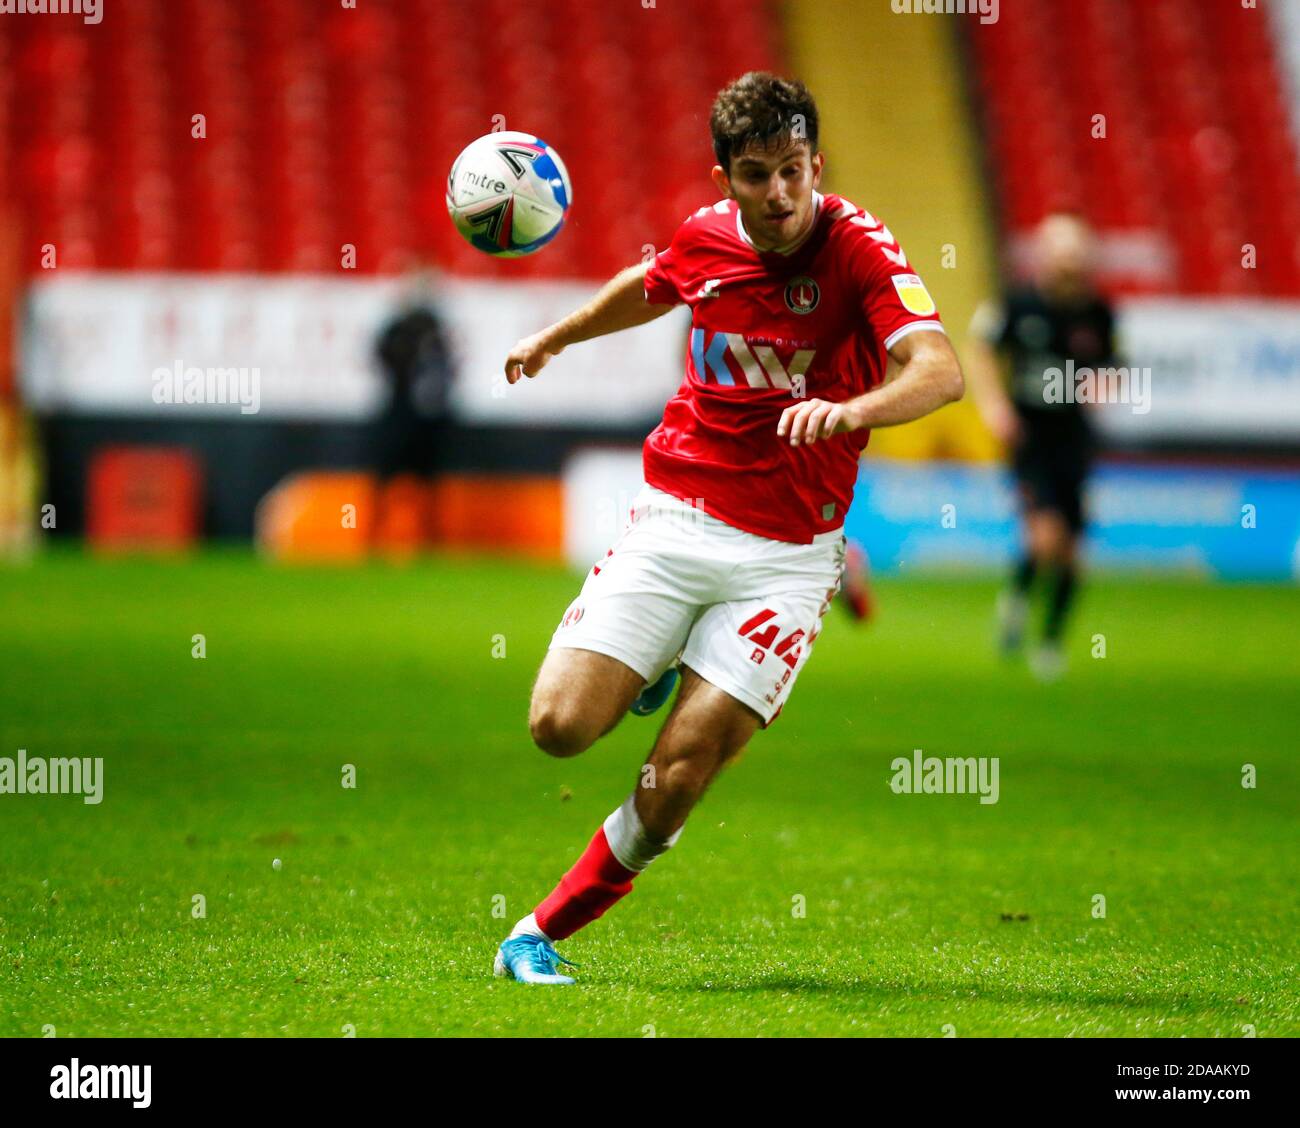 WOOLWICH, United Kingdom, NOVEMBER 10: Charlton Athletic's Hady Ghandour during Papa John's Trophy - Southern Group G  between Charlton Athletic  and Stock Photo